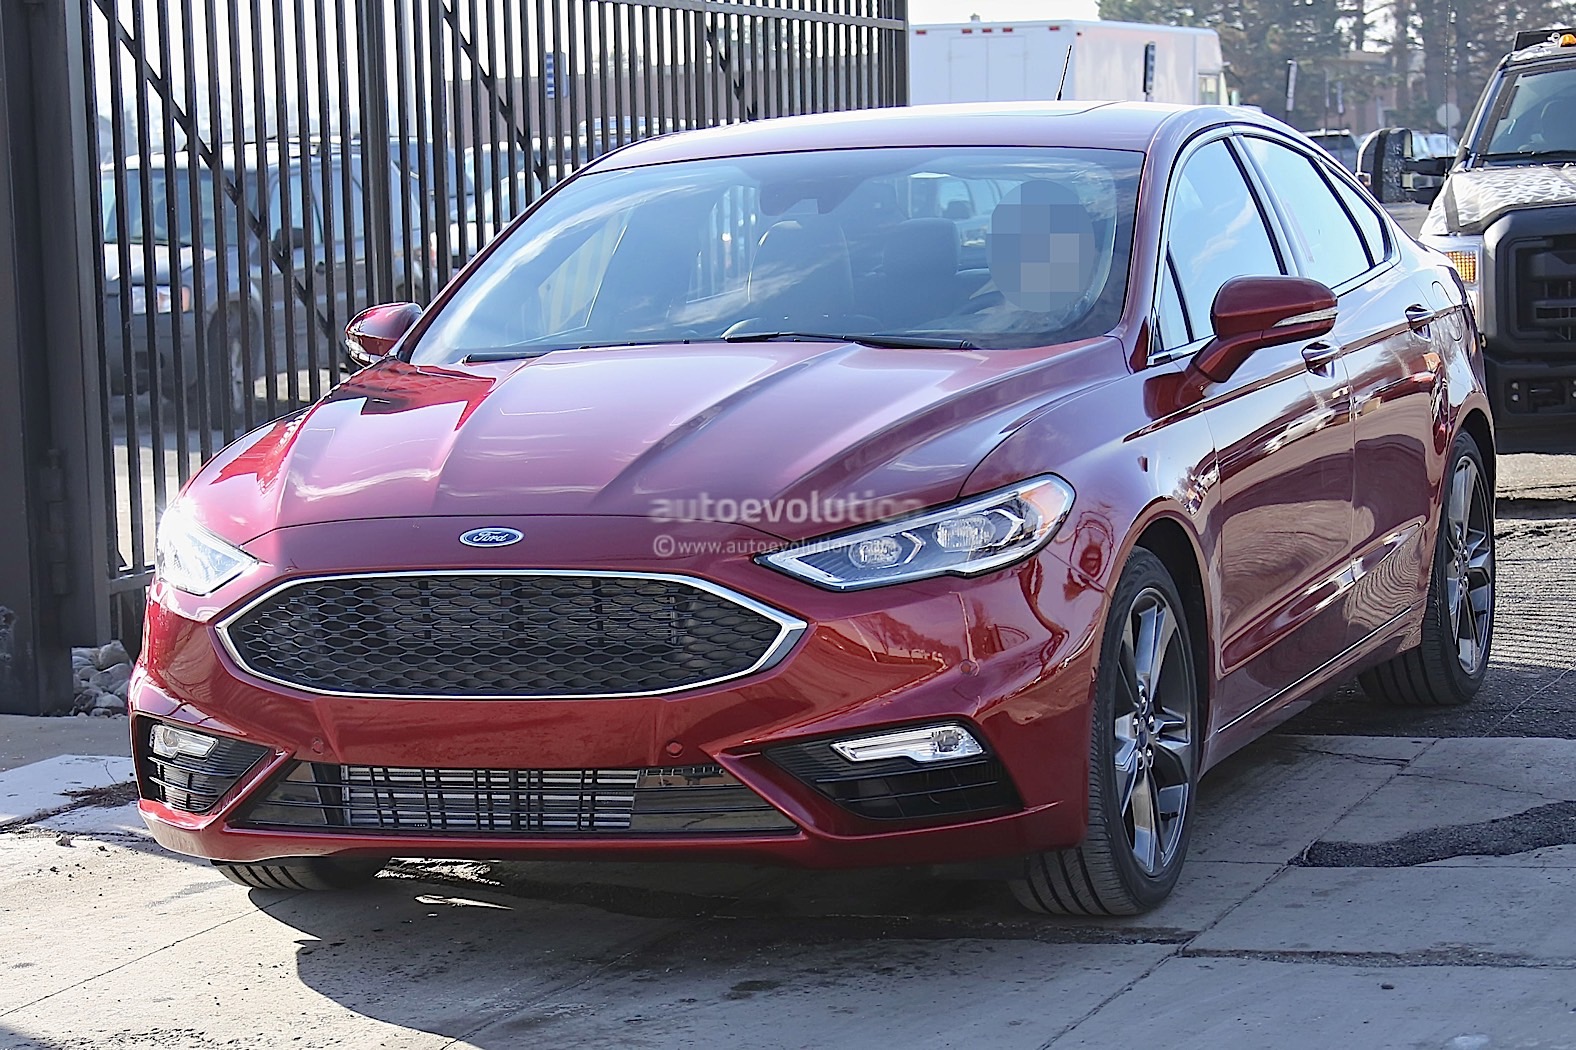 This Is the 2017 Ford Fusion Naked Ahead of the Detroit Auto Show